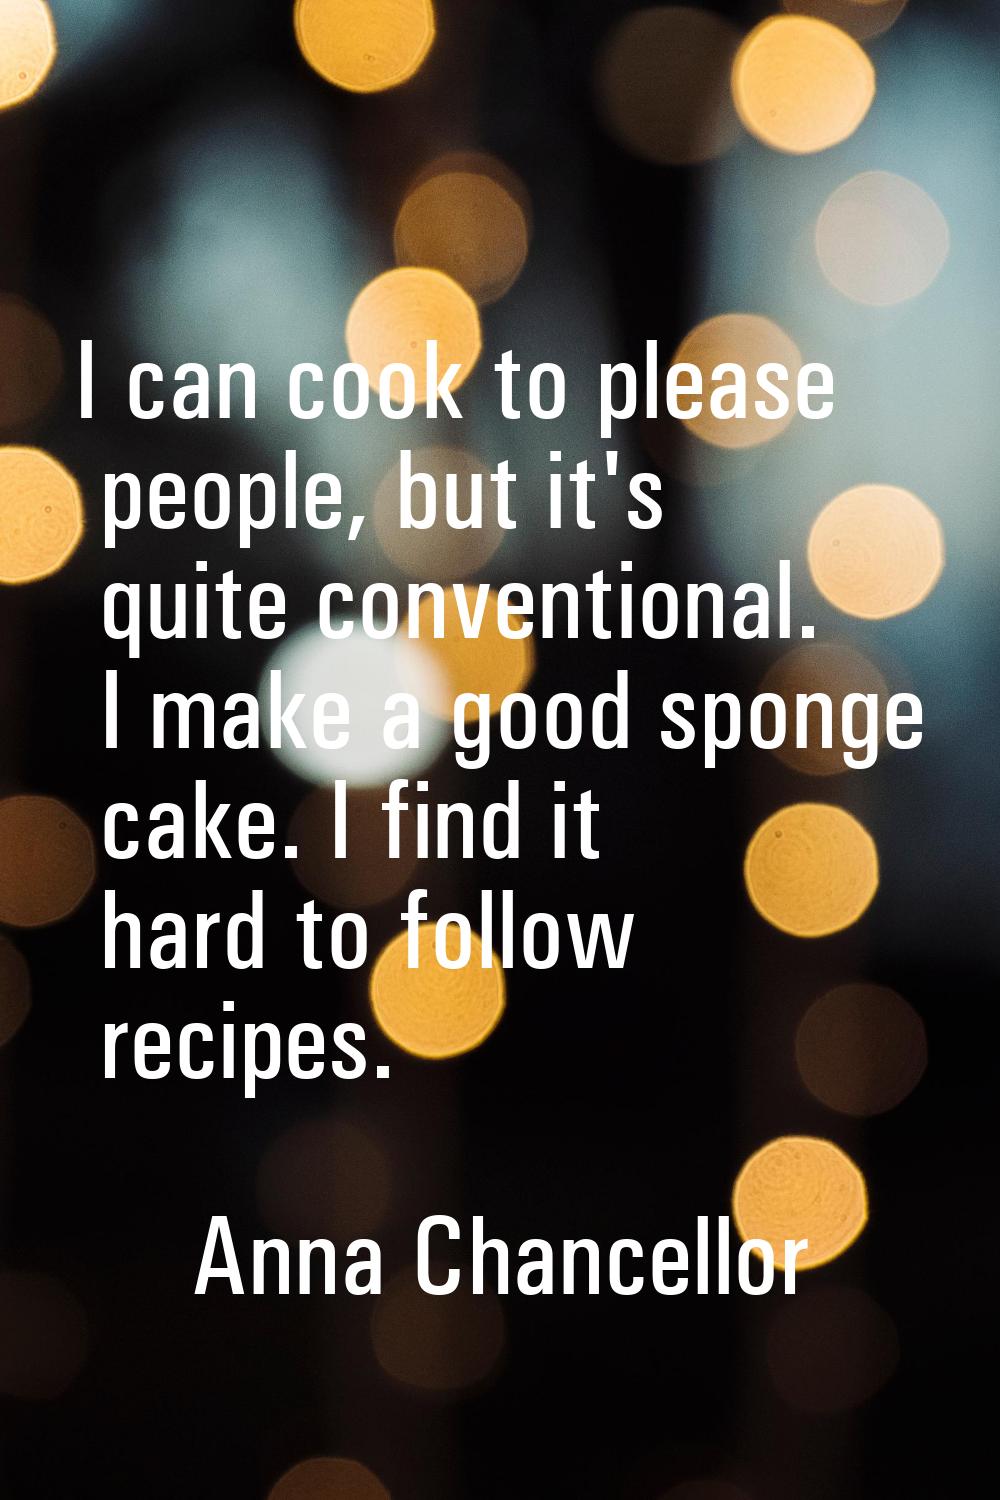 I can cook to please people, but it's quite conventional. I make a good sponge cake. I find it hard